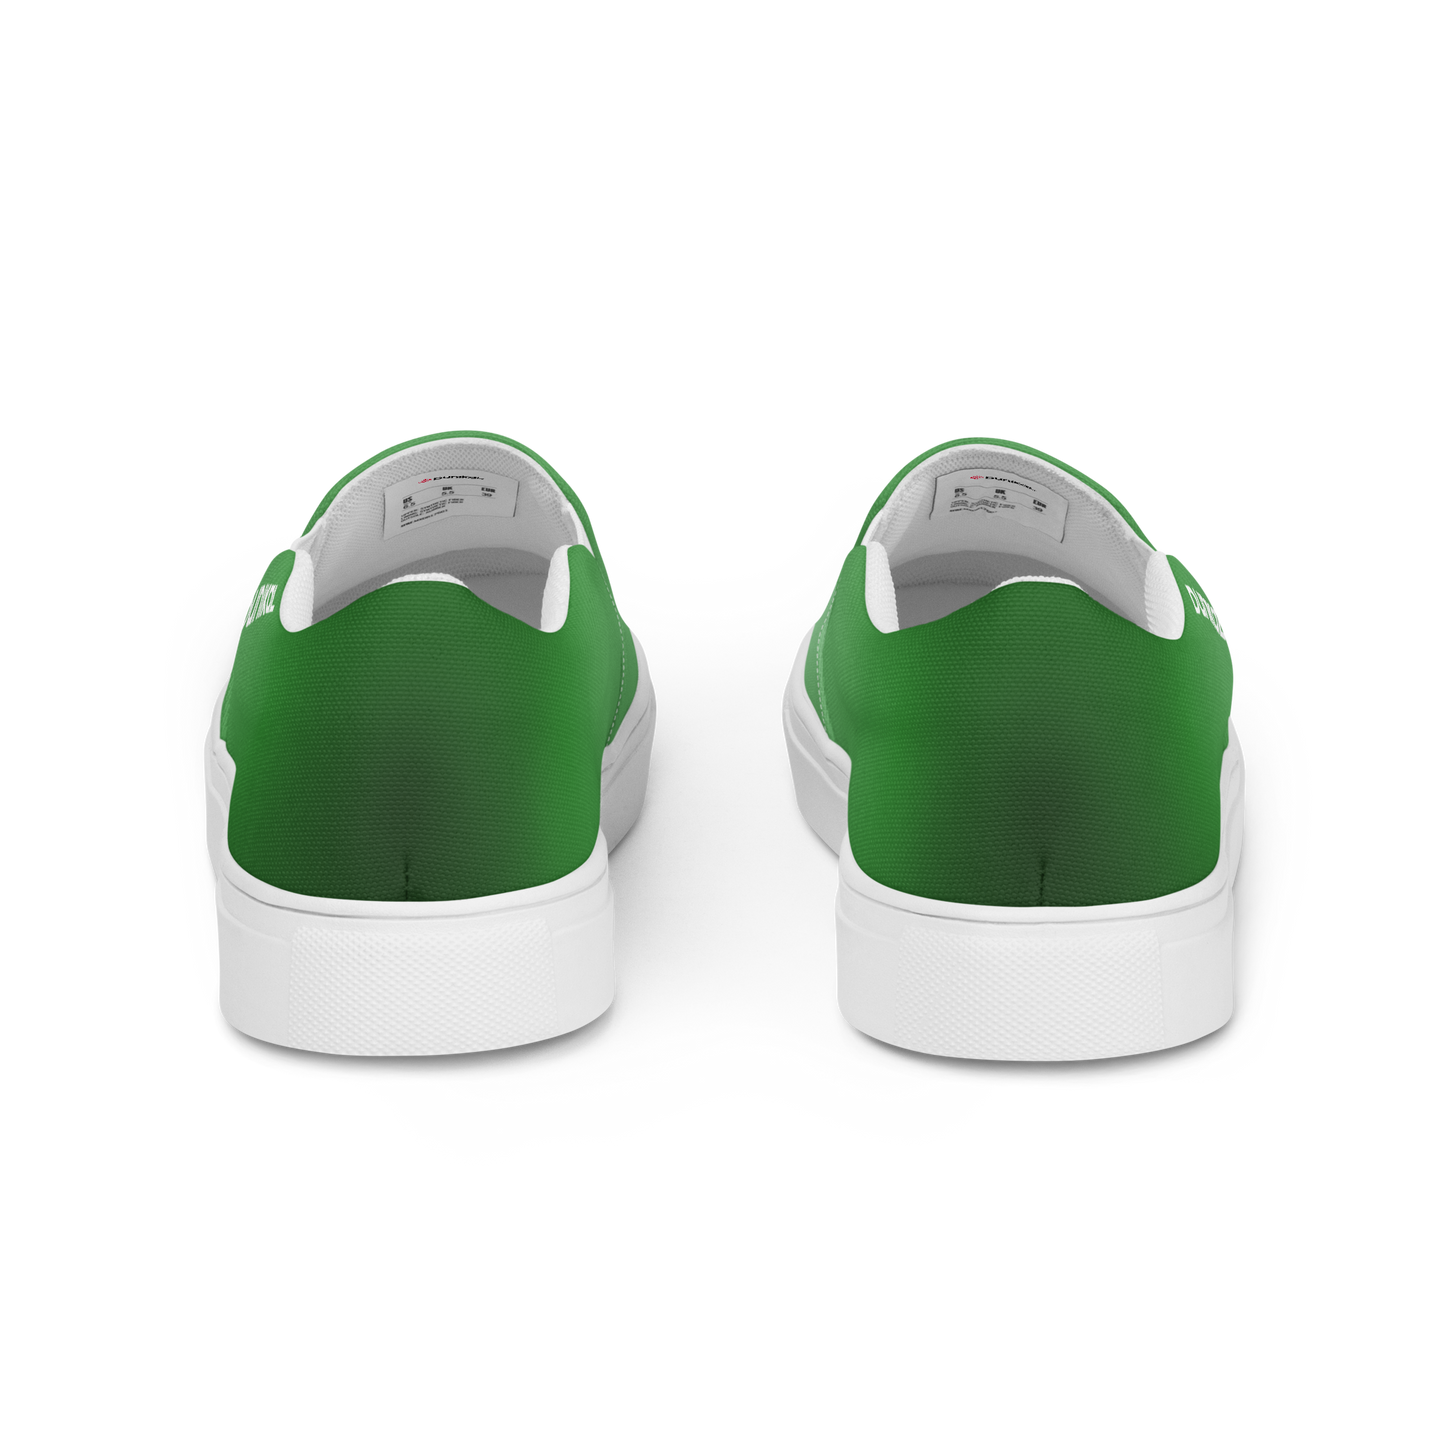 Men's Canvas Slip-Ons ❯ Pure Gradient ❯ Forest Green